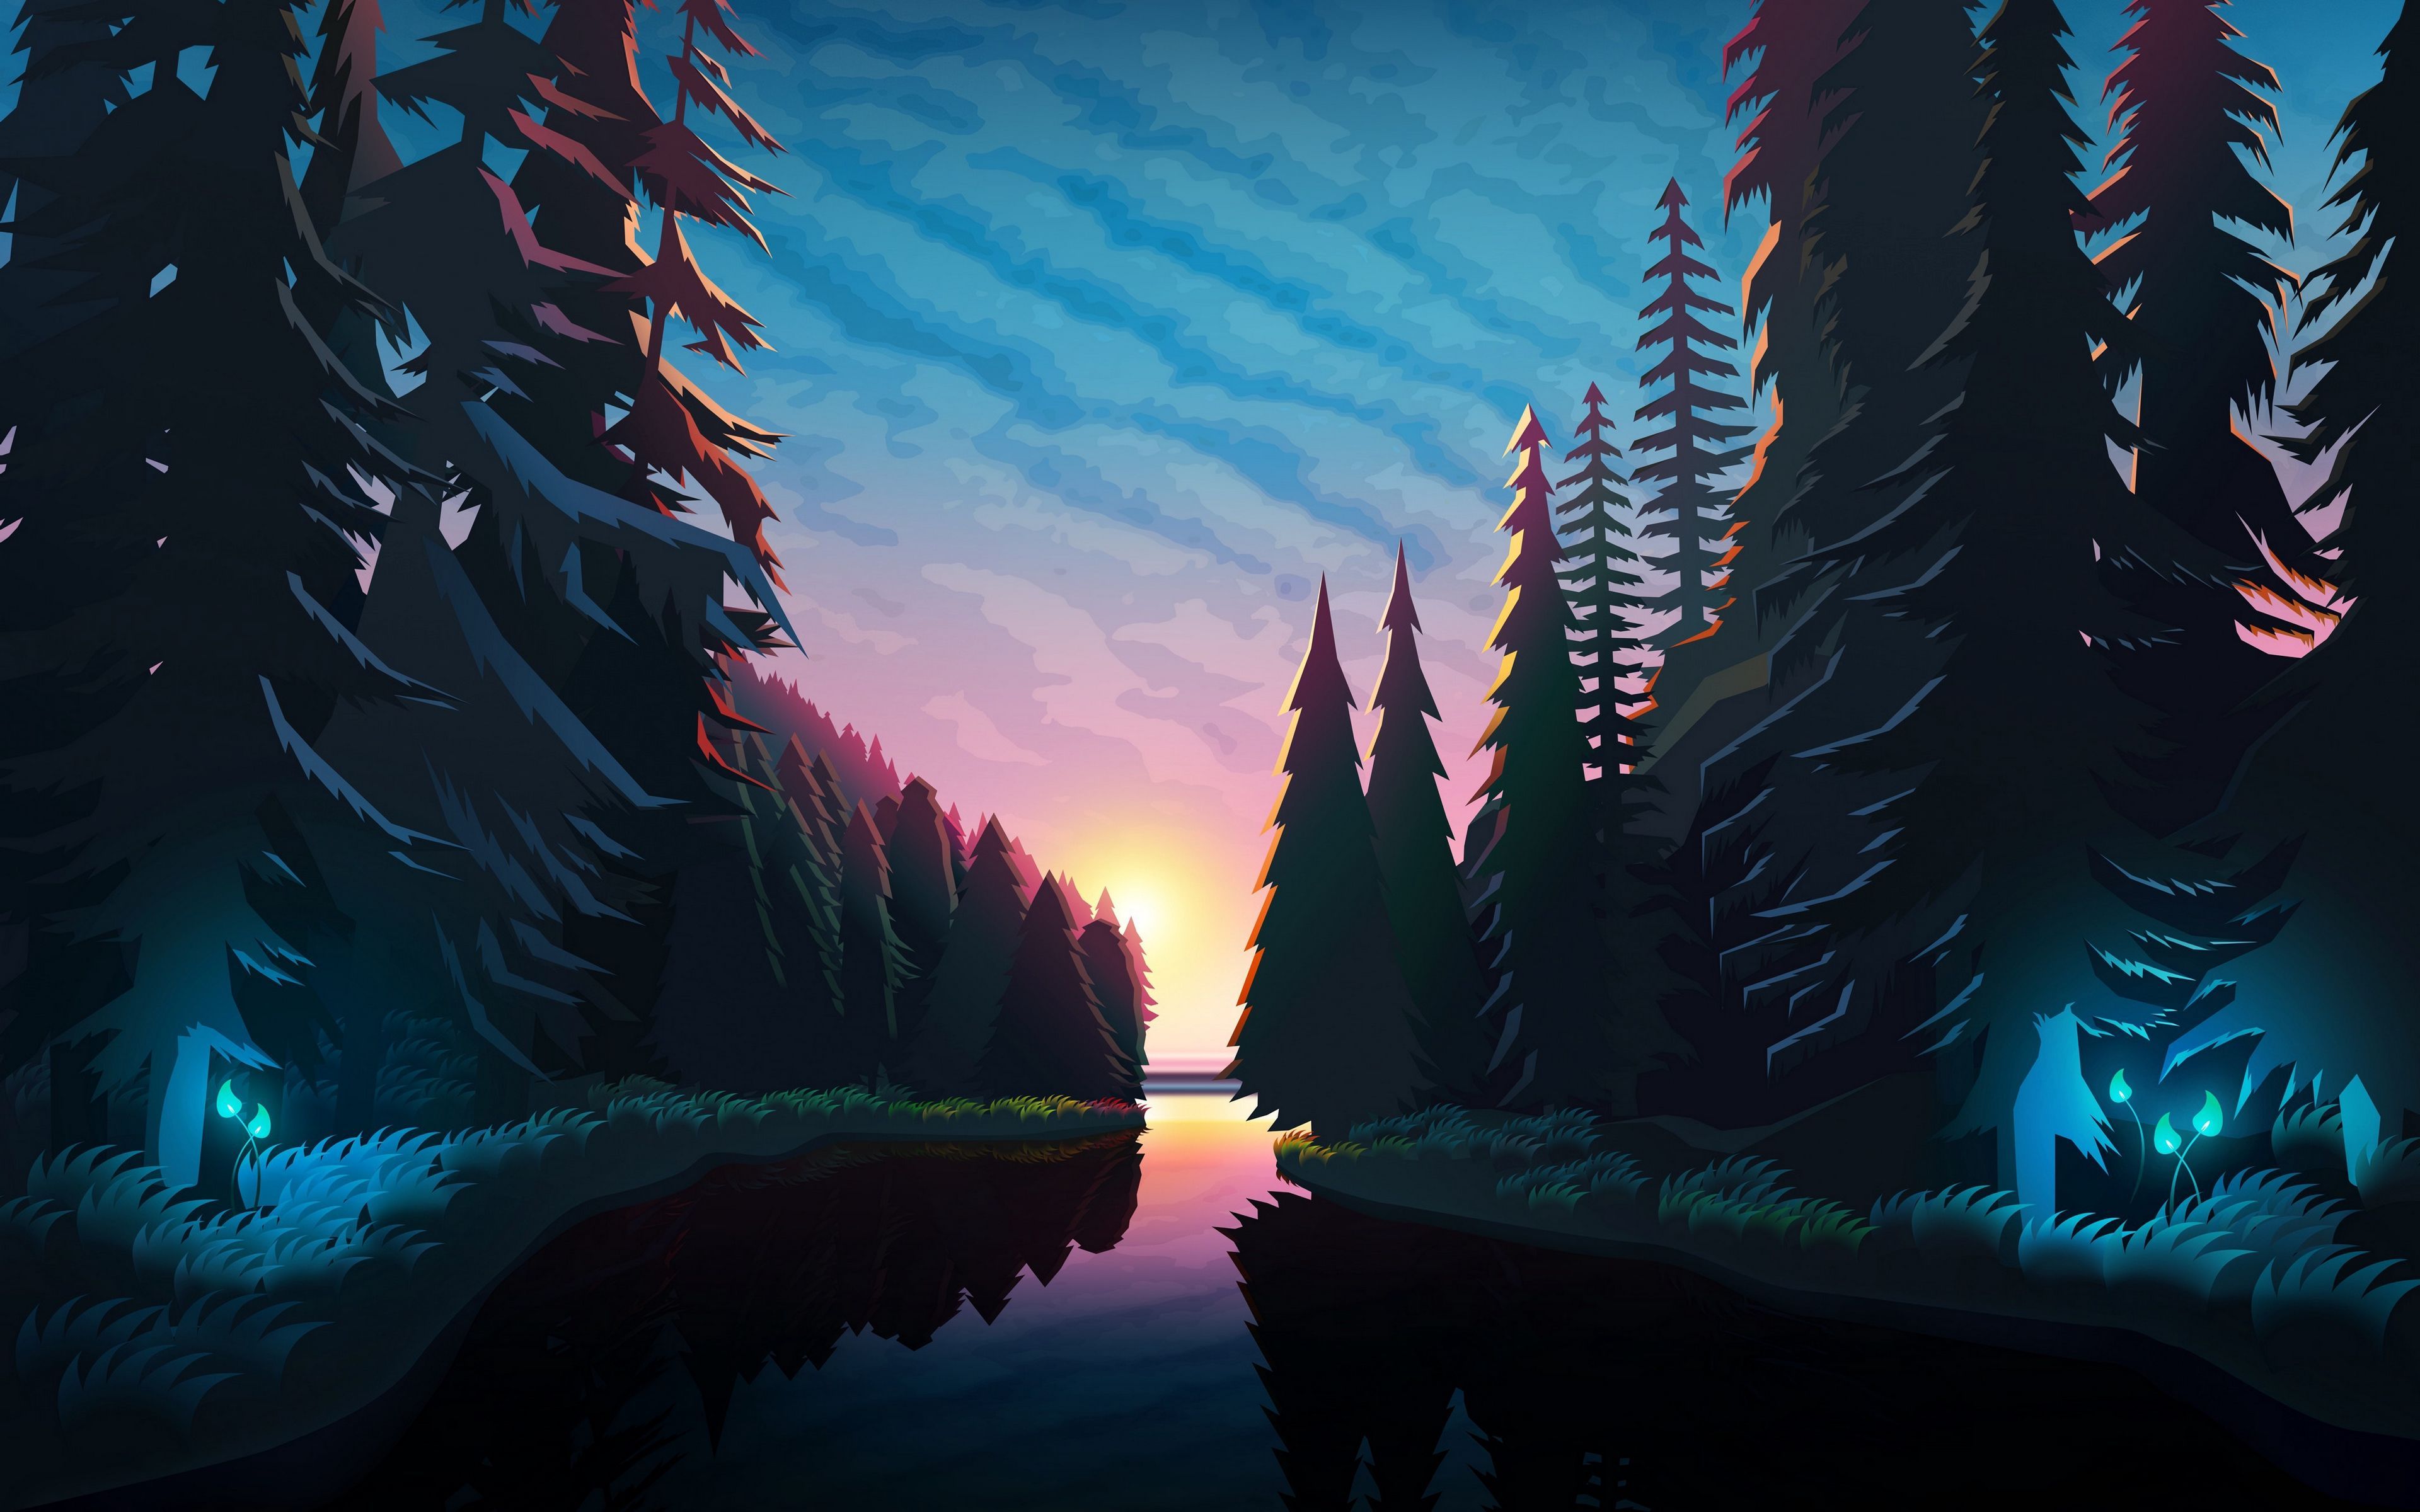 A painting of the forest at sunset - Nature